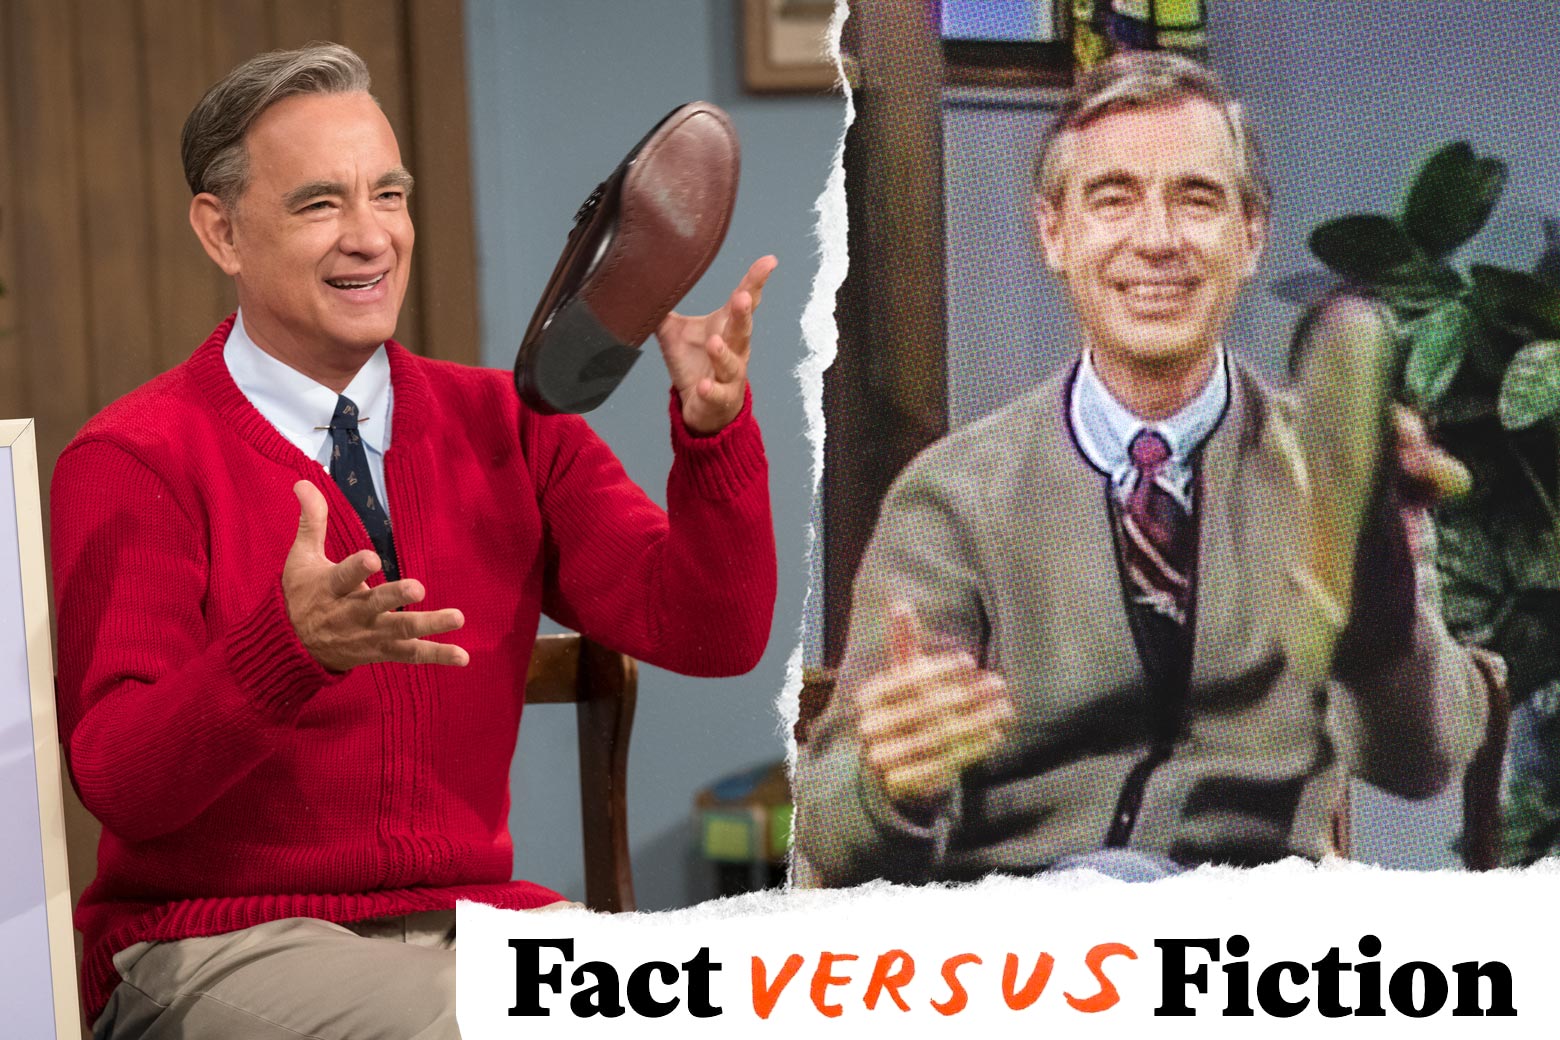 Tom Hanks as Fred Rogers in A Beautiful Day in the Neighborhood and Fred Rogers in Mister Rogers' Neighborhood.